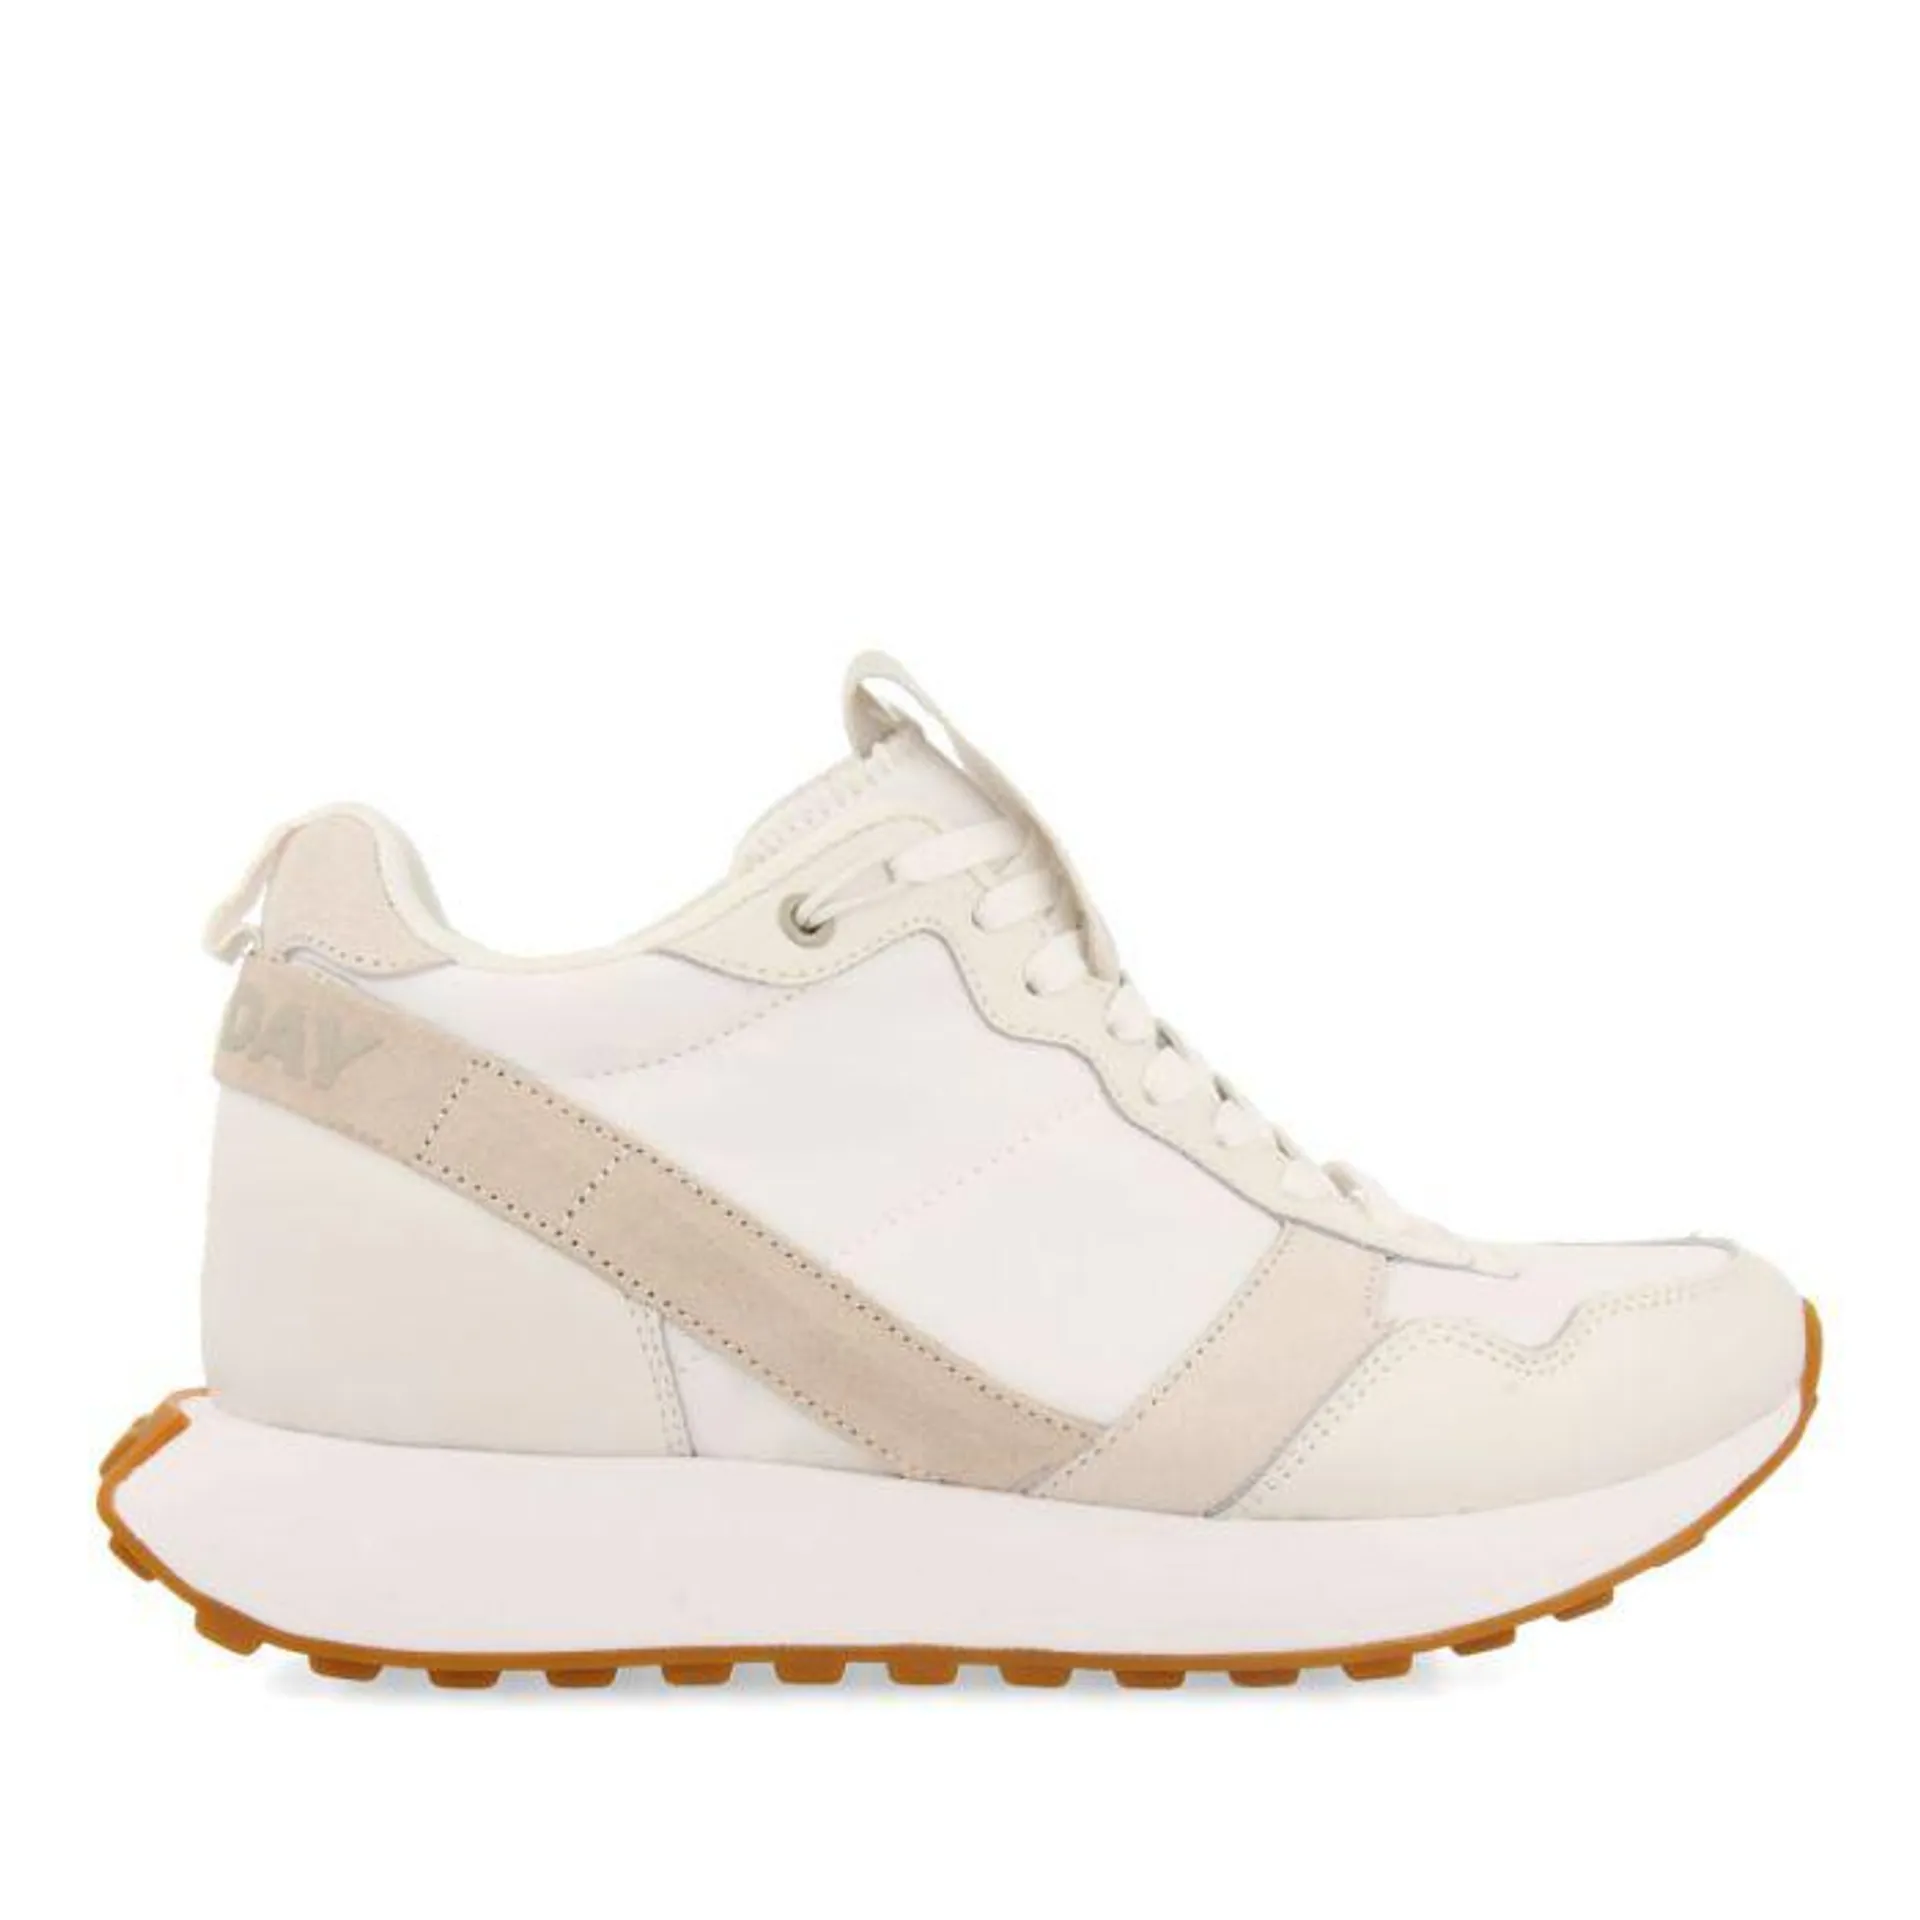 Aracai women's white retro-style sneakers with inner wedges